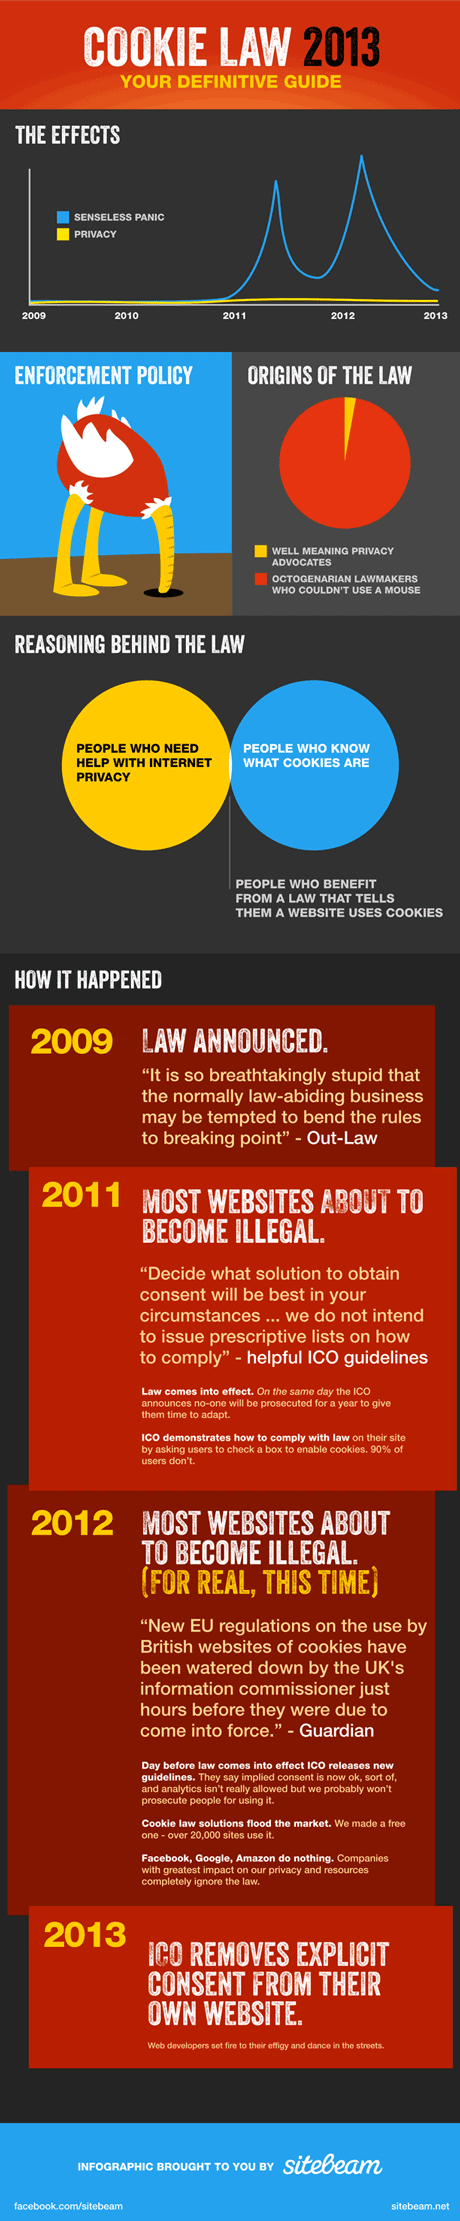 The Cookie Law 2013 - Your Definitive Guide by Sitebeam